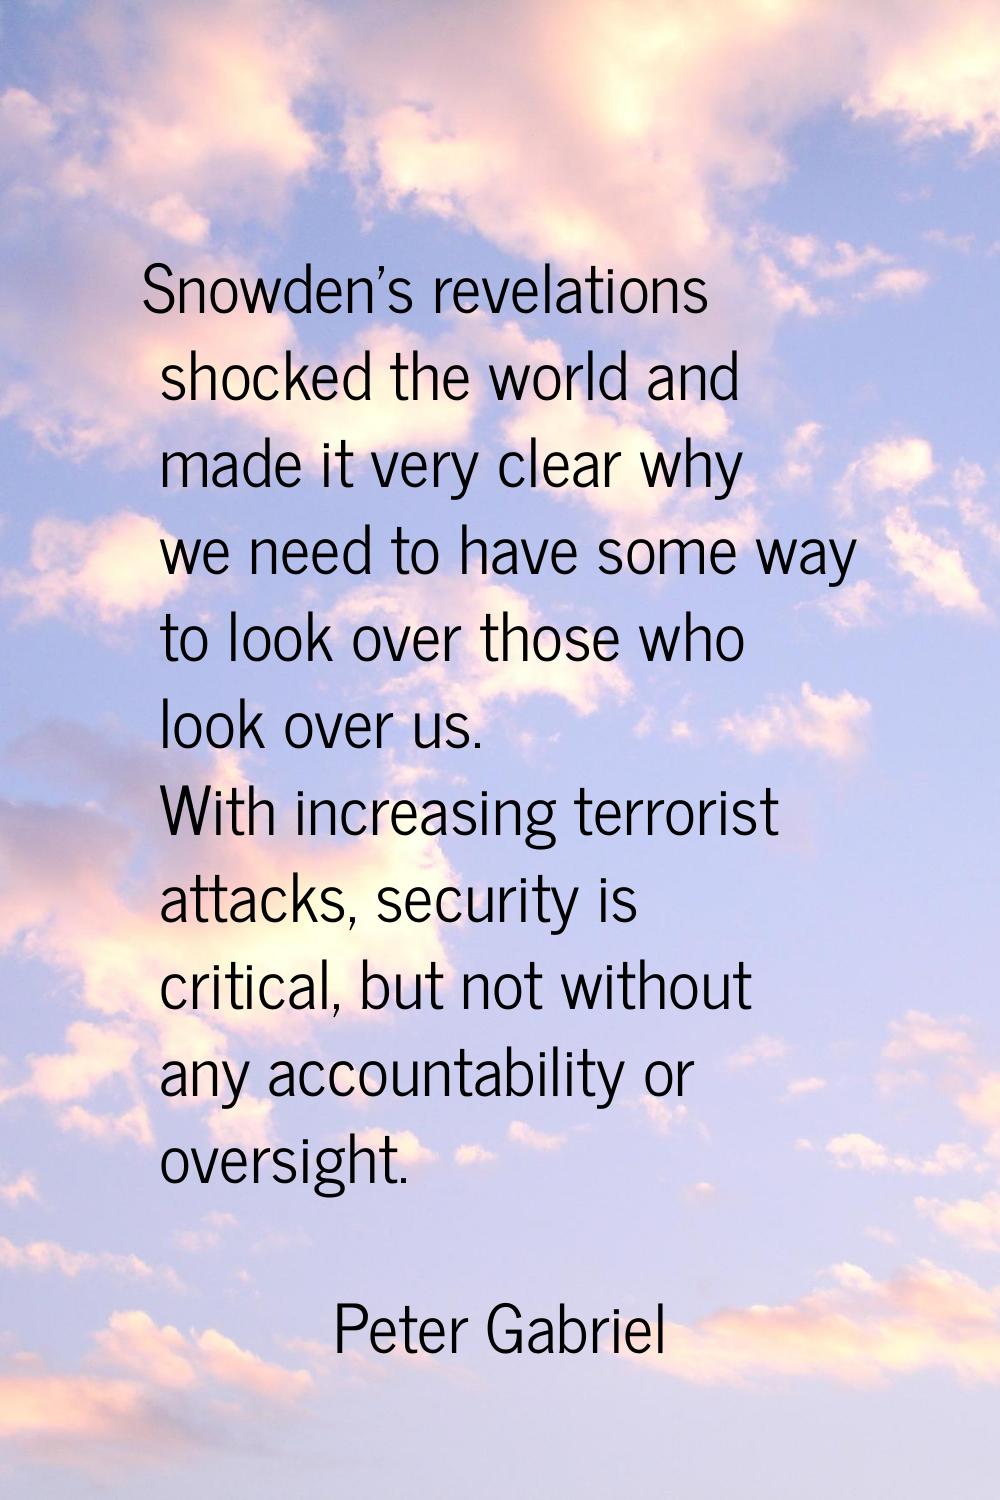 Snowden's revelations shocked the world and made it very clear why we need to have some way to look